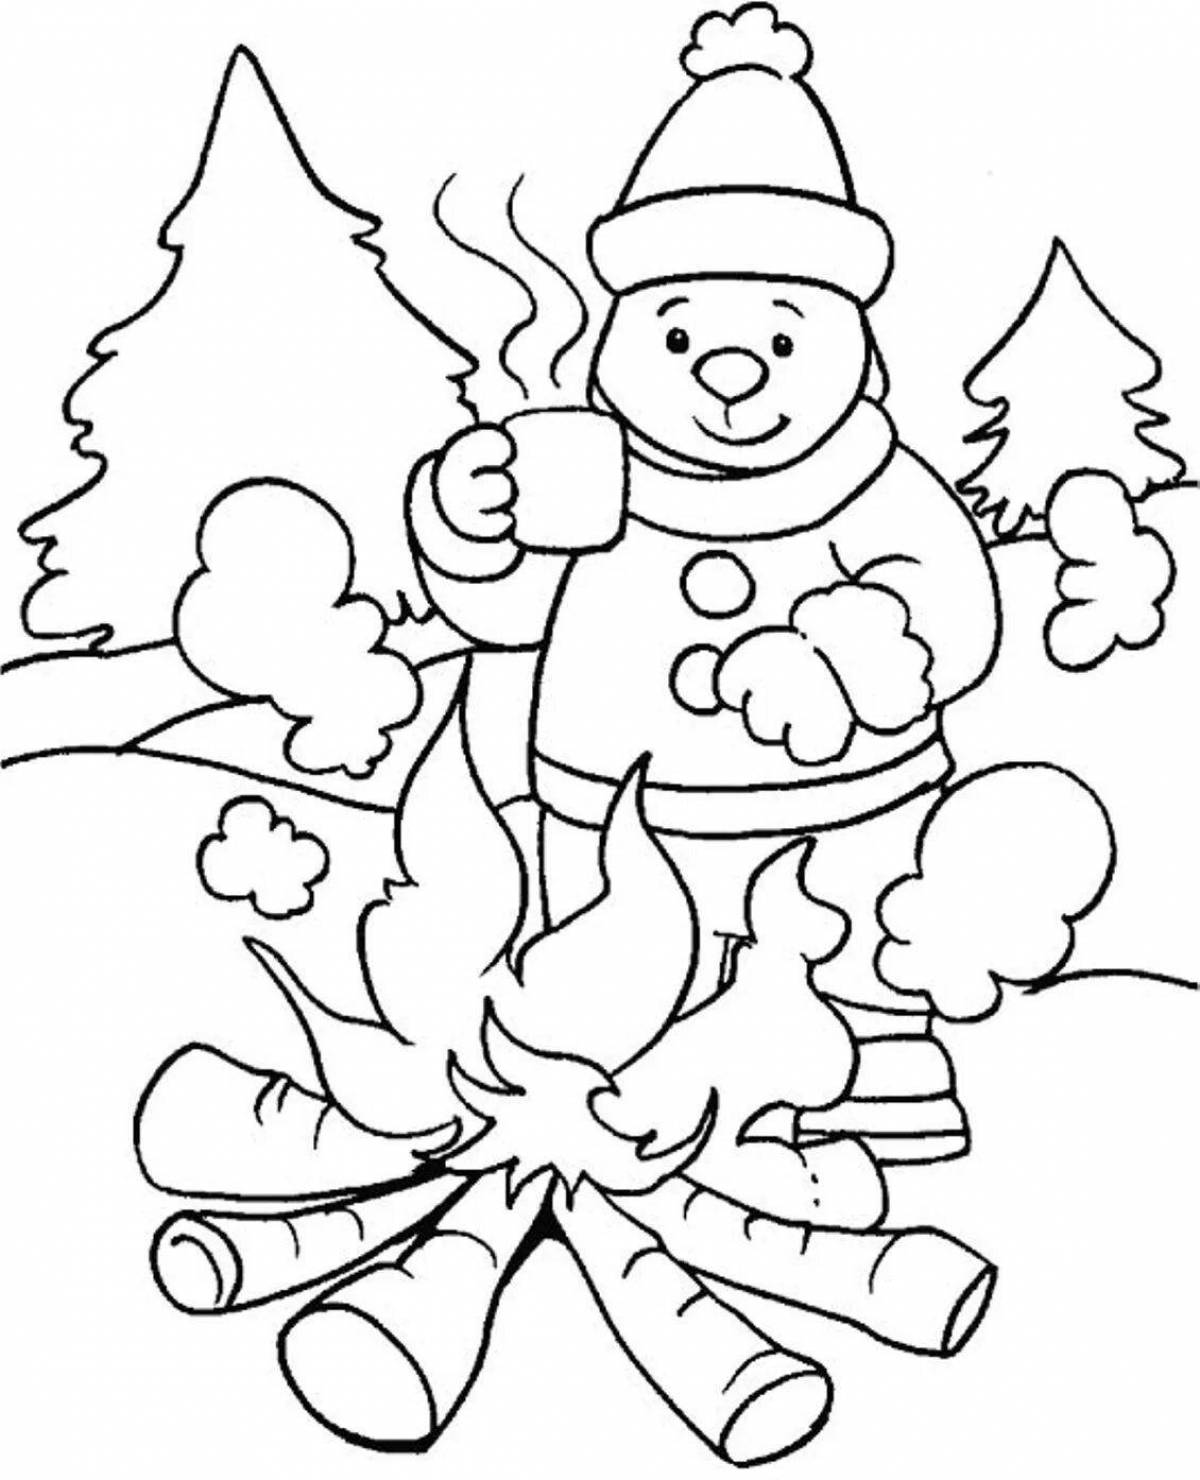 Lovely 5 year old winter coloring book